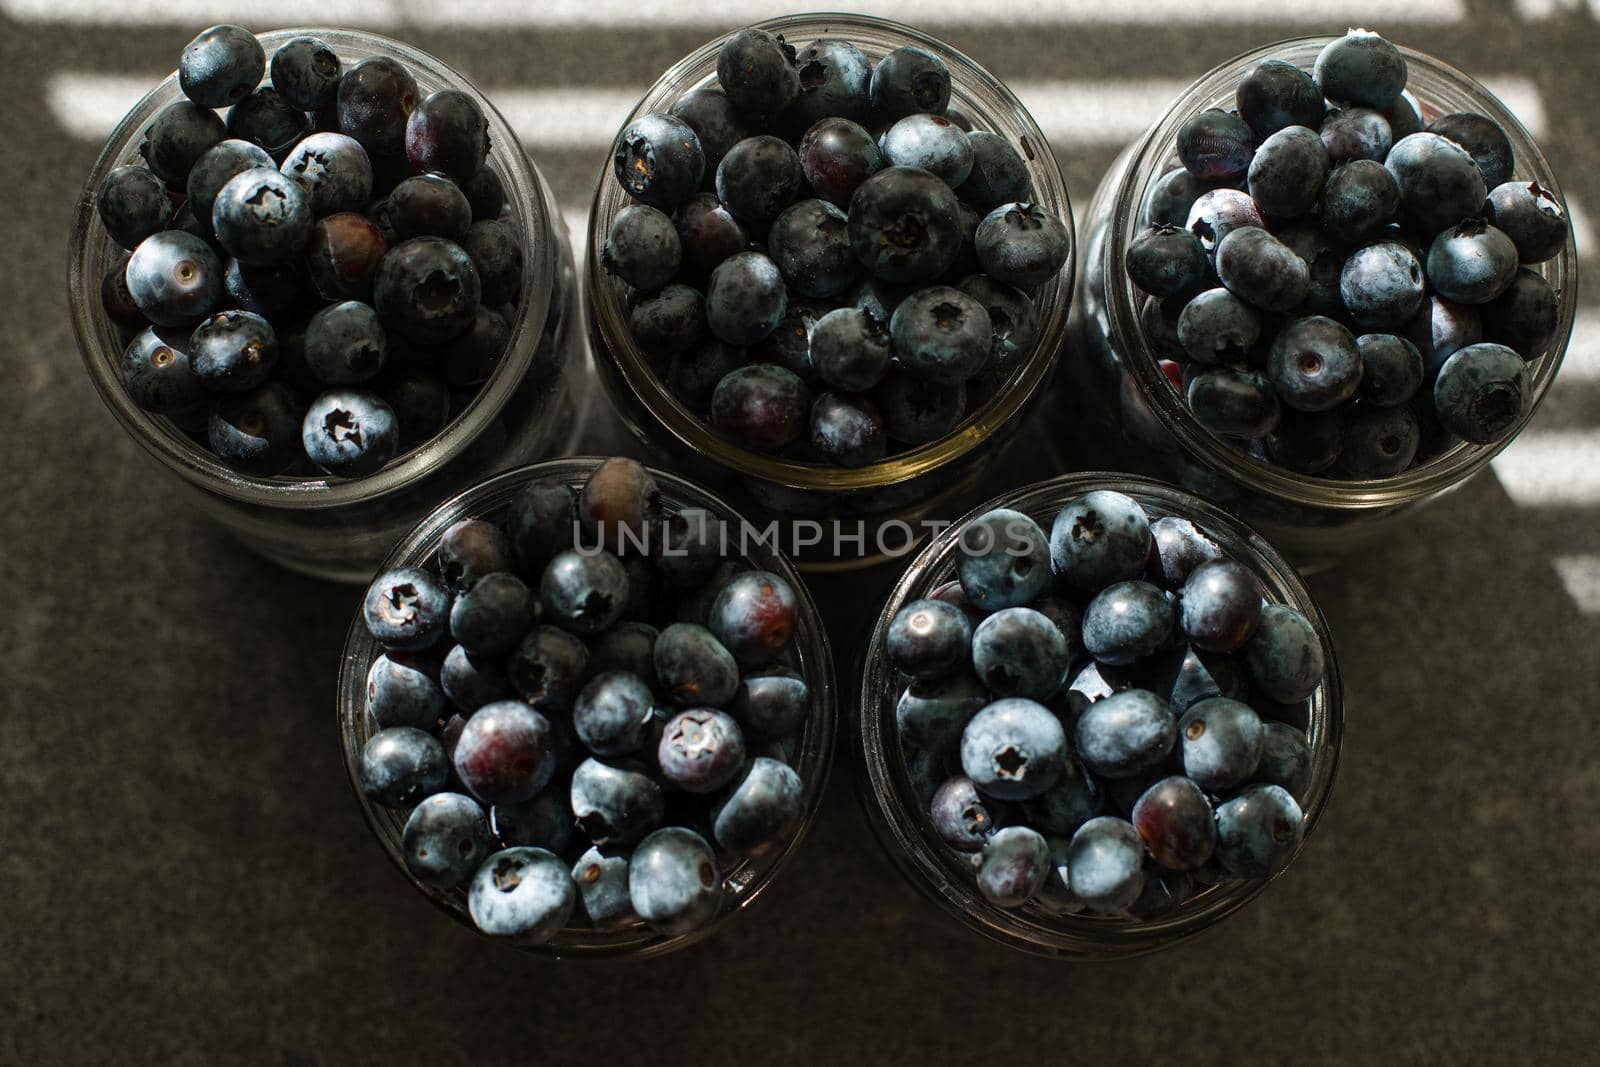 Many large beautiful juicy fresh blueberries lie in glass jars by StudioLucky